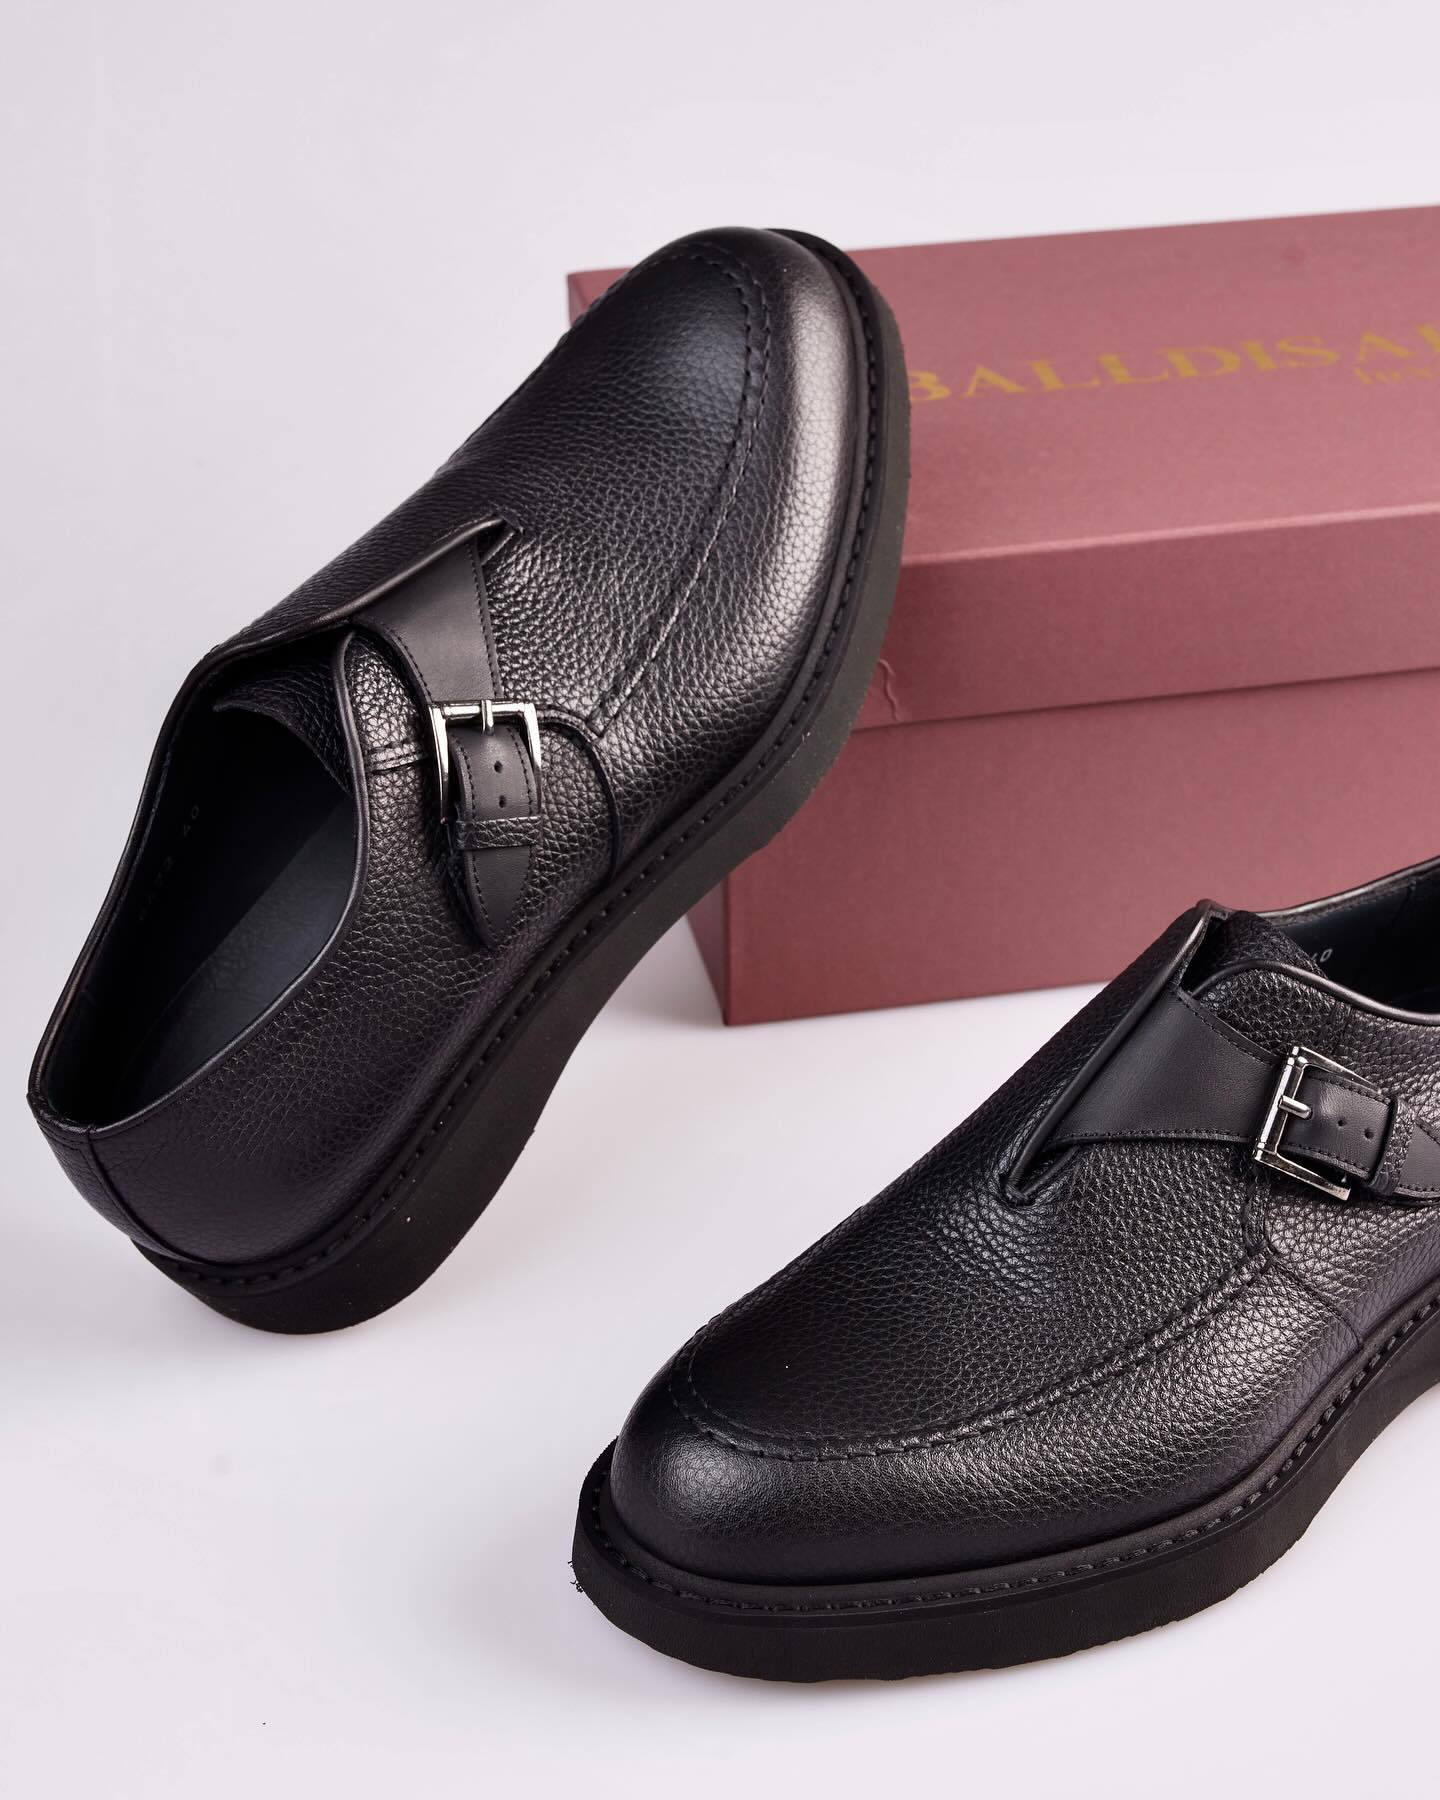 Handmade Italian business casual leather shoes